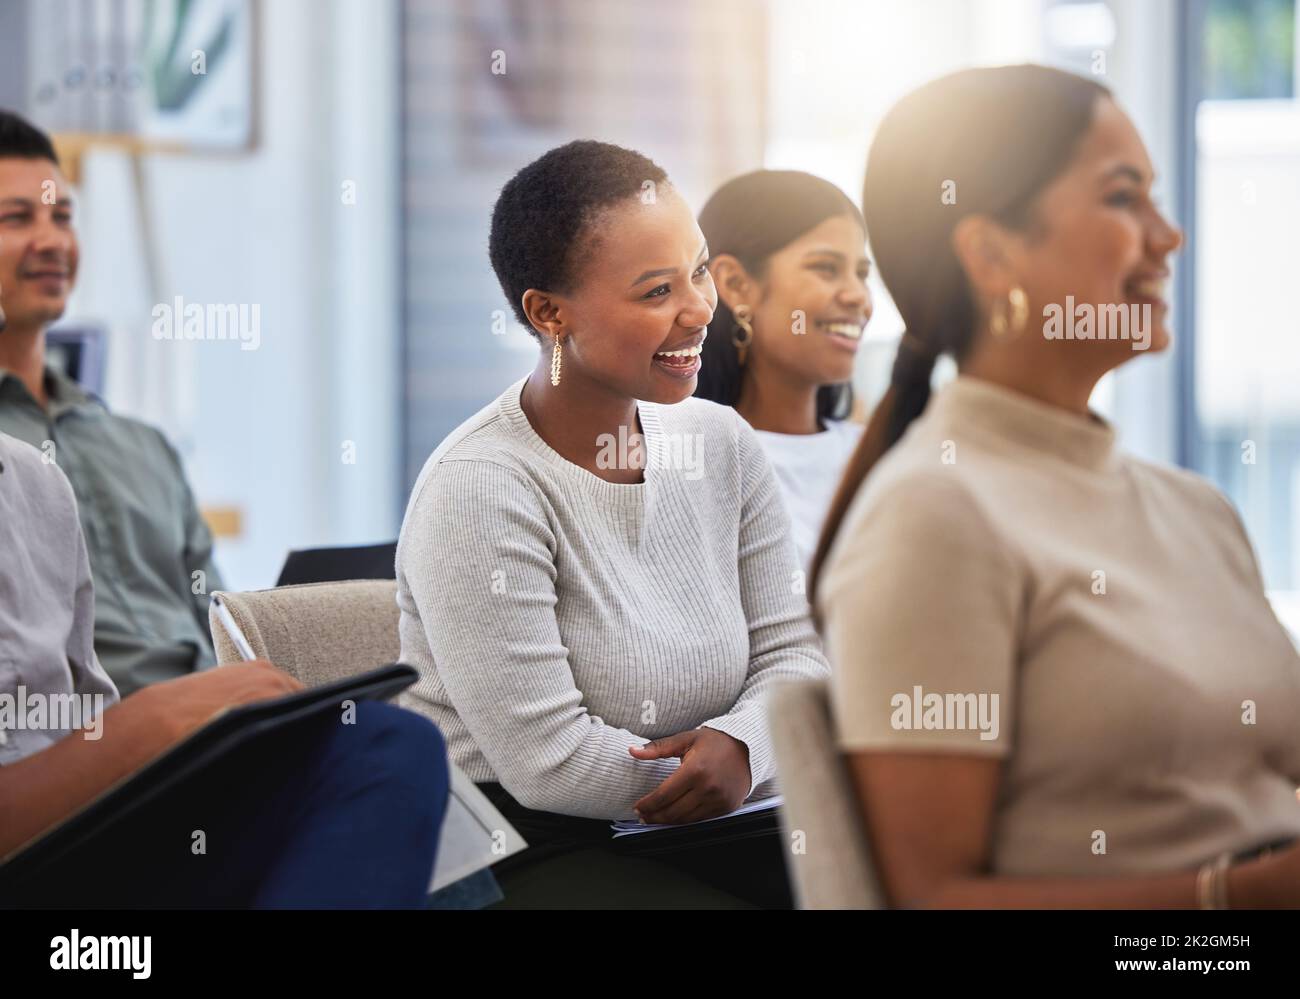 The journey towards success. Shot of a group of employees laughing during a meeting at work in a modern office. Stock Photo